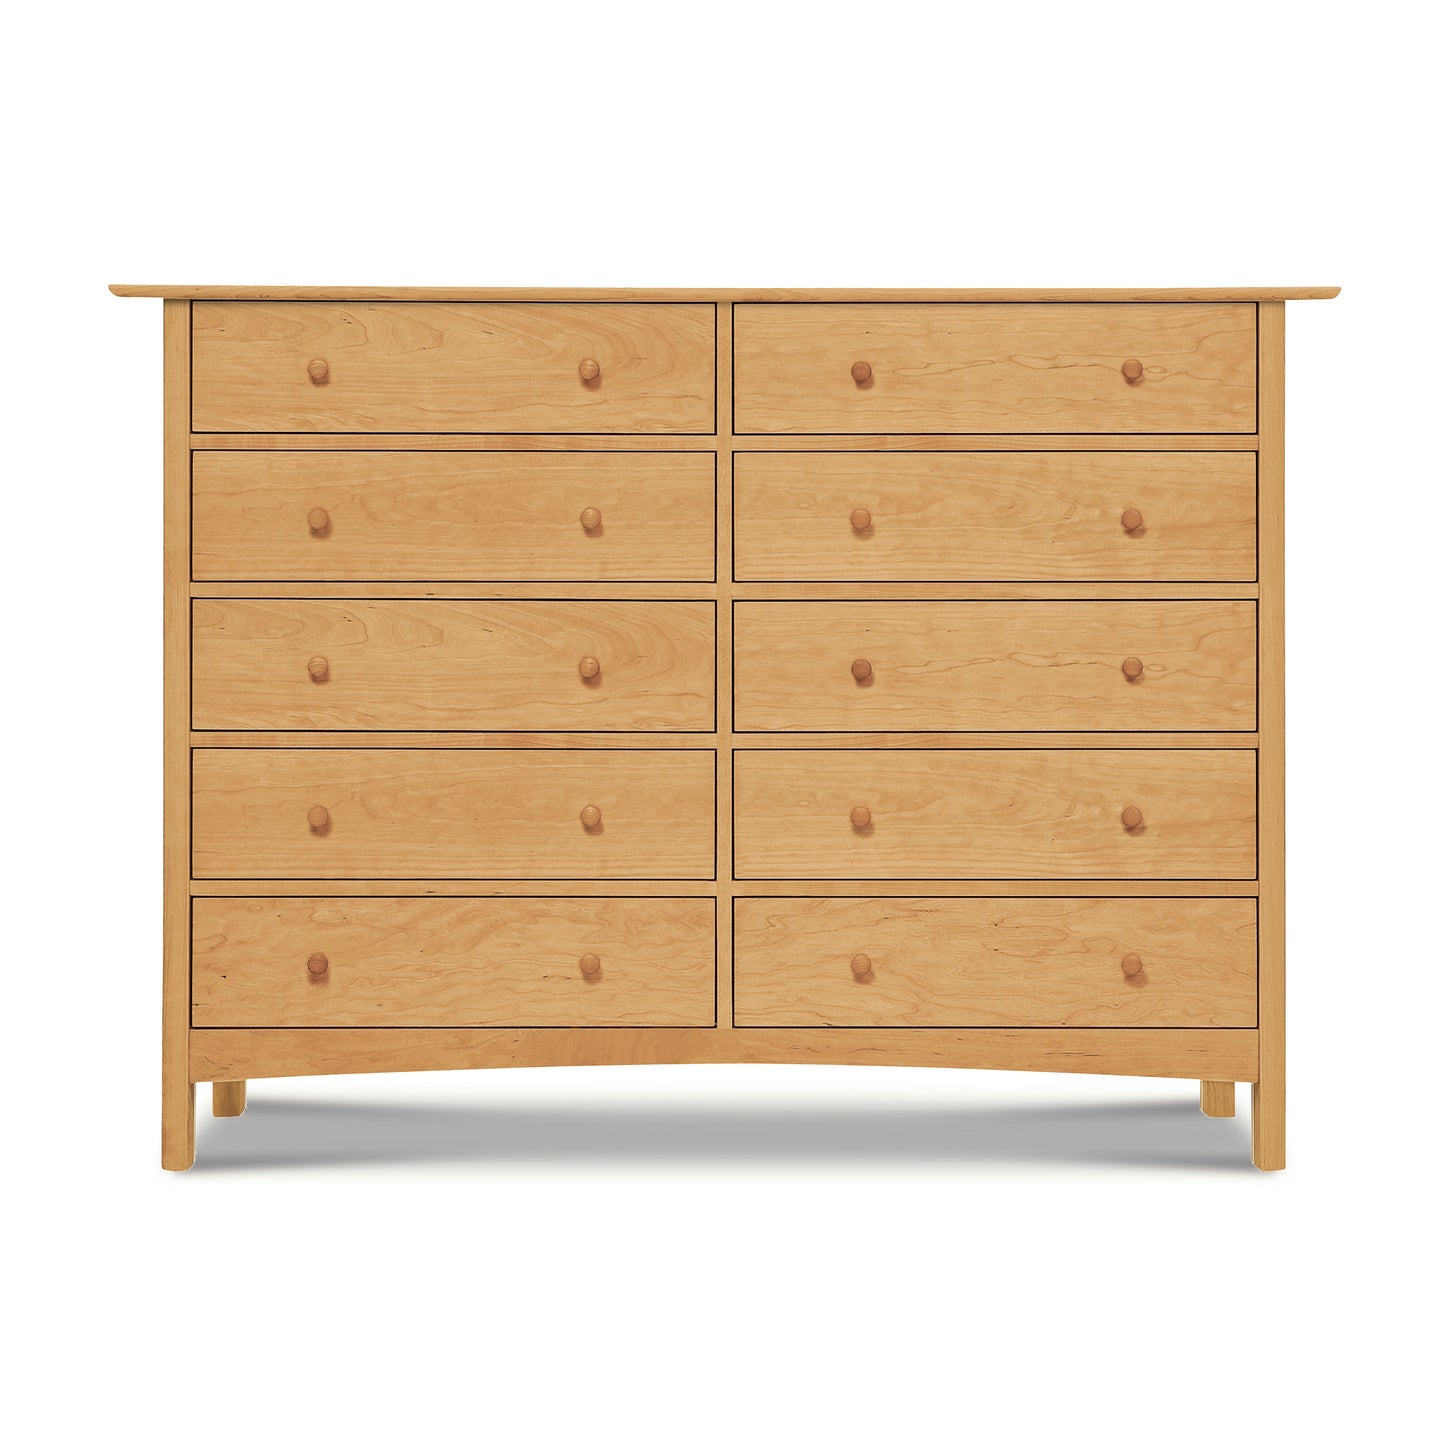 A Heartwood Shaker 10-Drawer Dresser from the Vermont Furniture Designs, featuring ten drawers with a simple, functional design and round knobs, isolated on a white background.